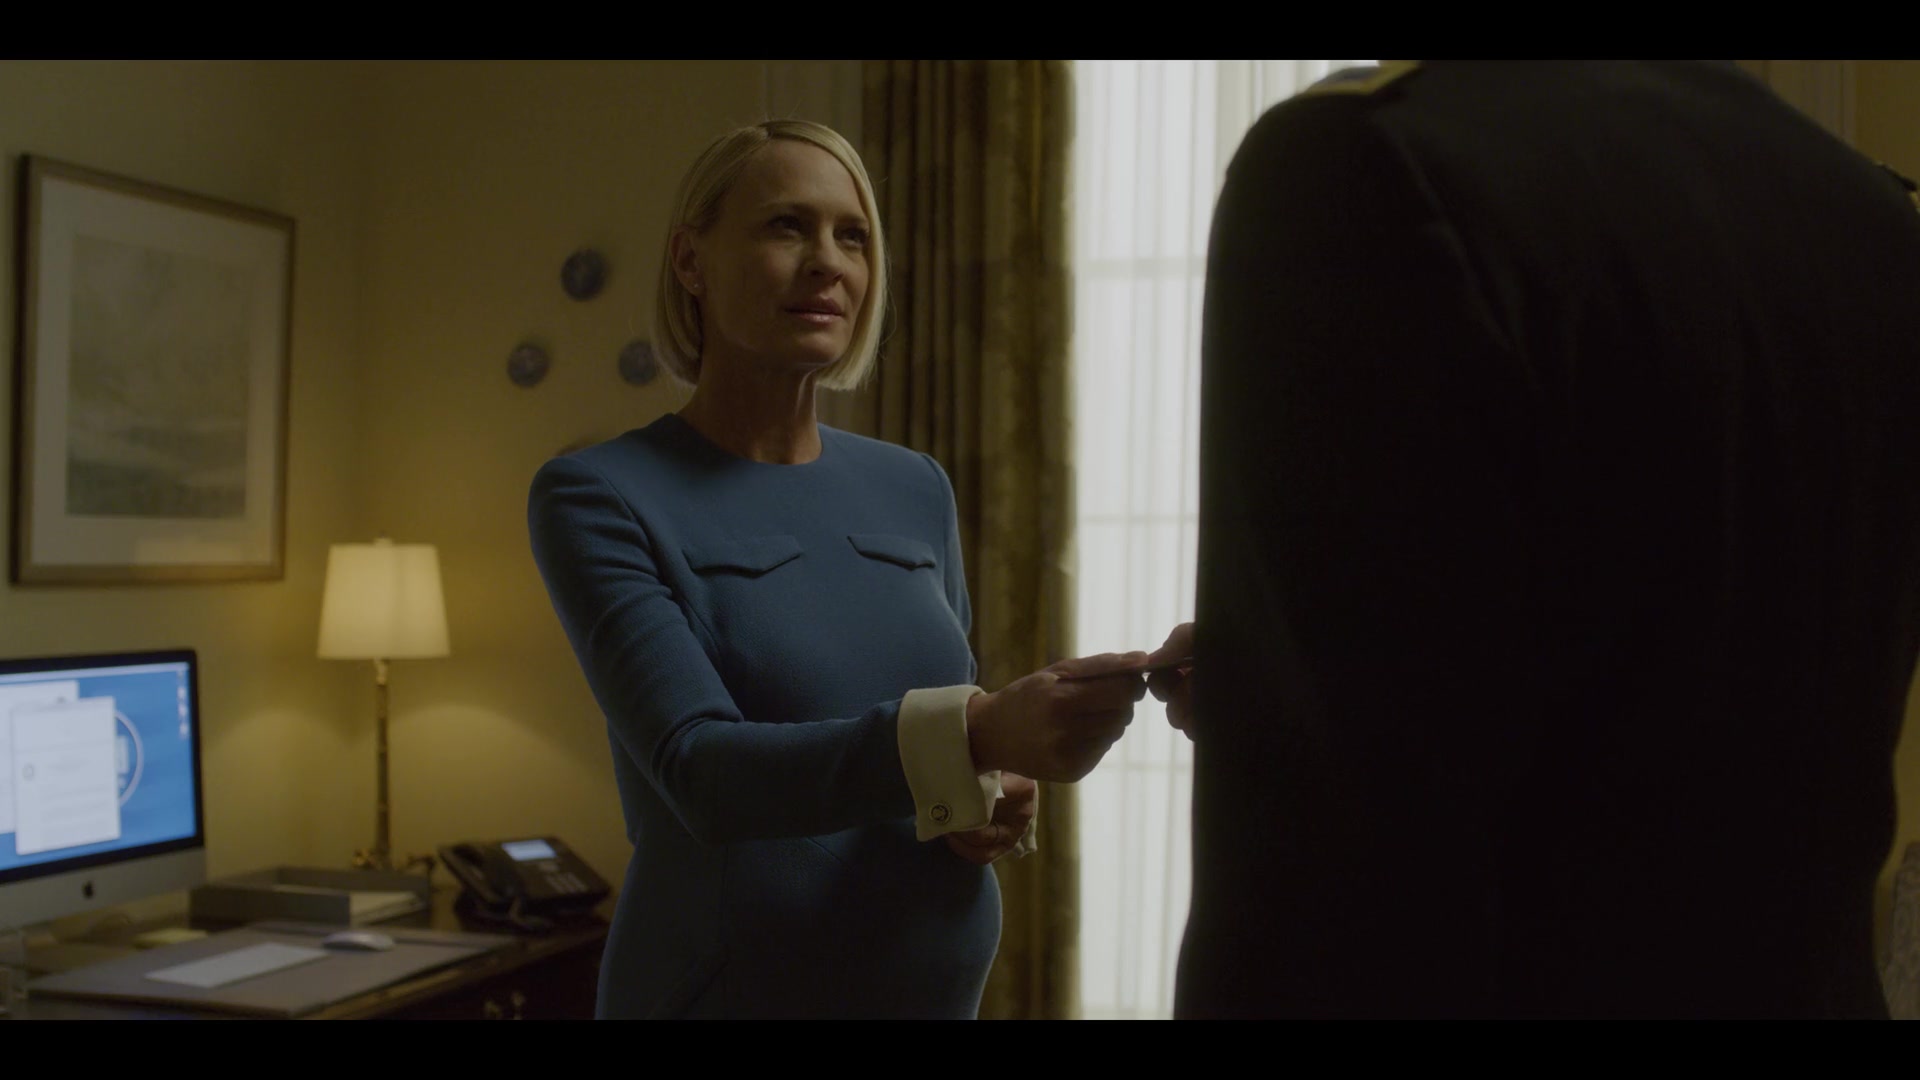 Apple IMac Computer Used By Pregnant Claire Underwood (Robin Wright) In ...